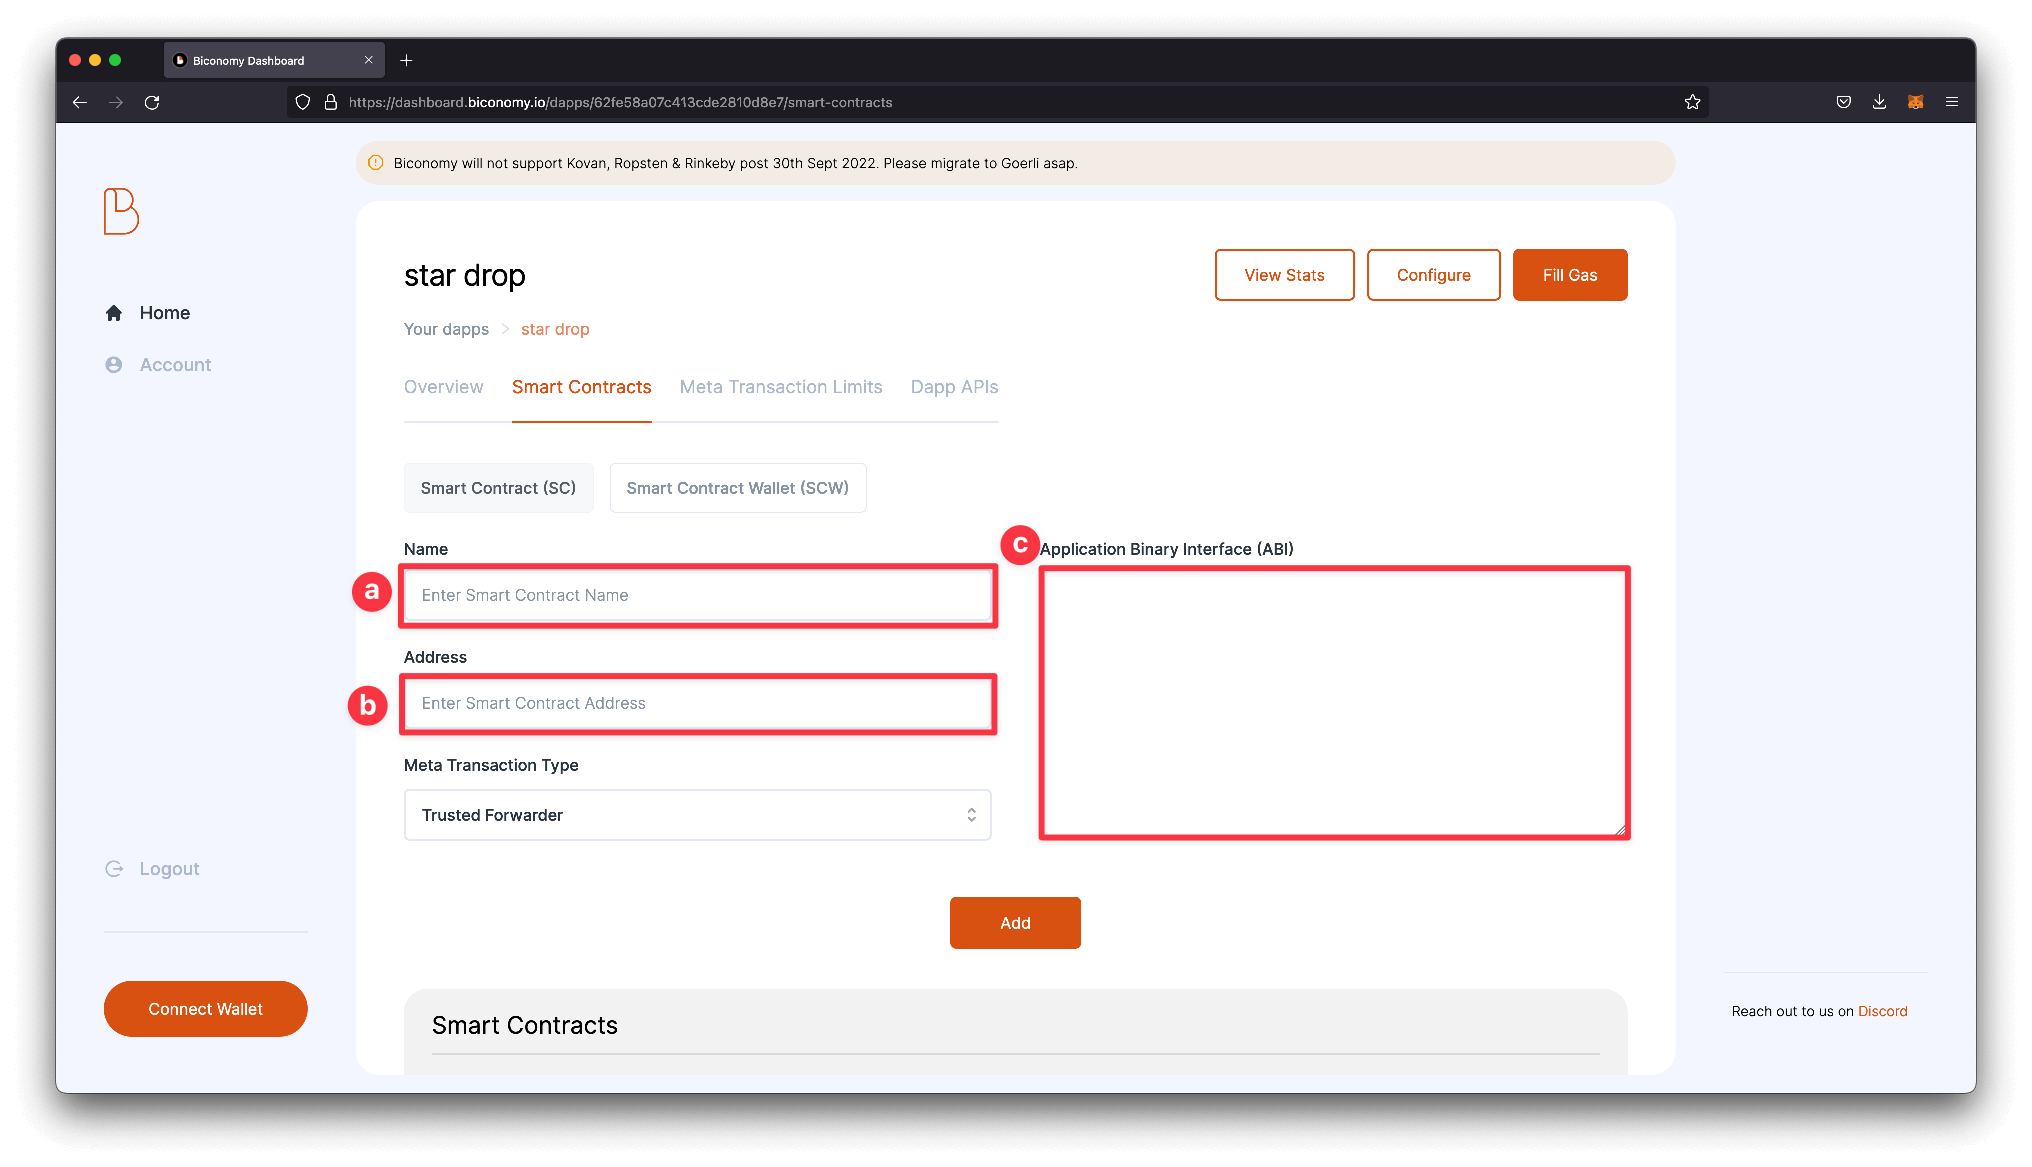 Add iun the details into the smart contracts tab